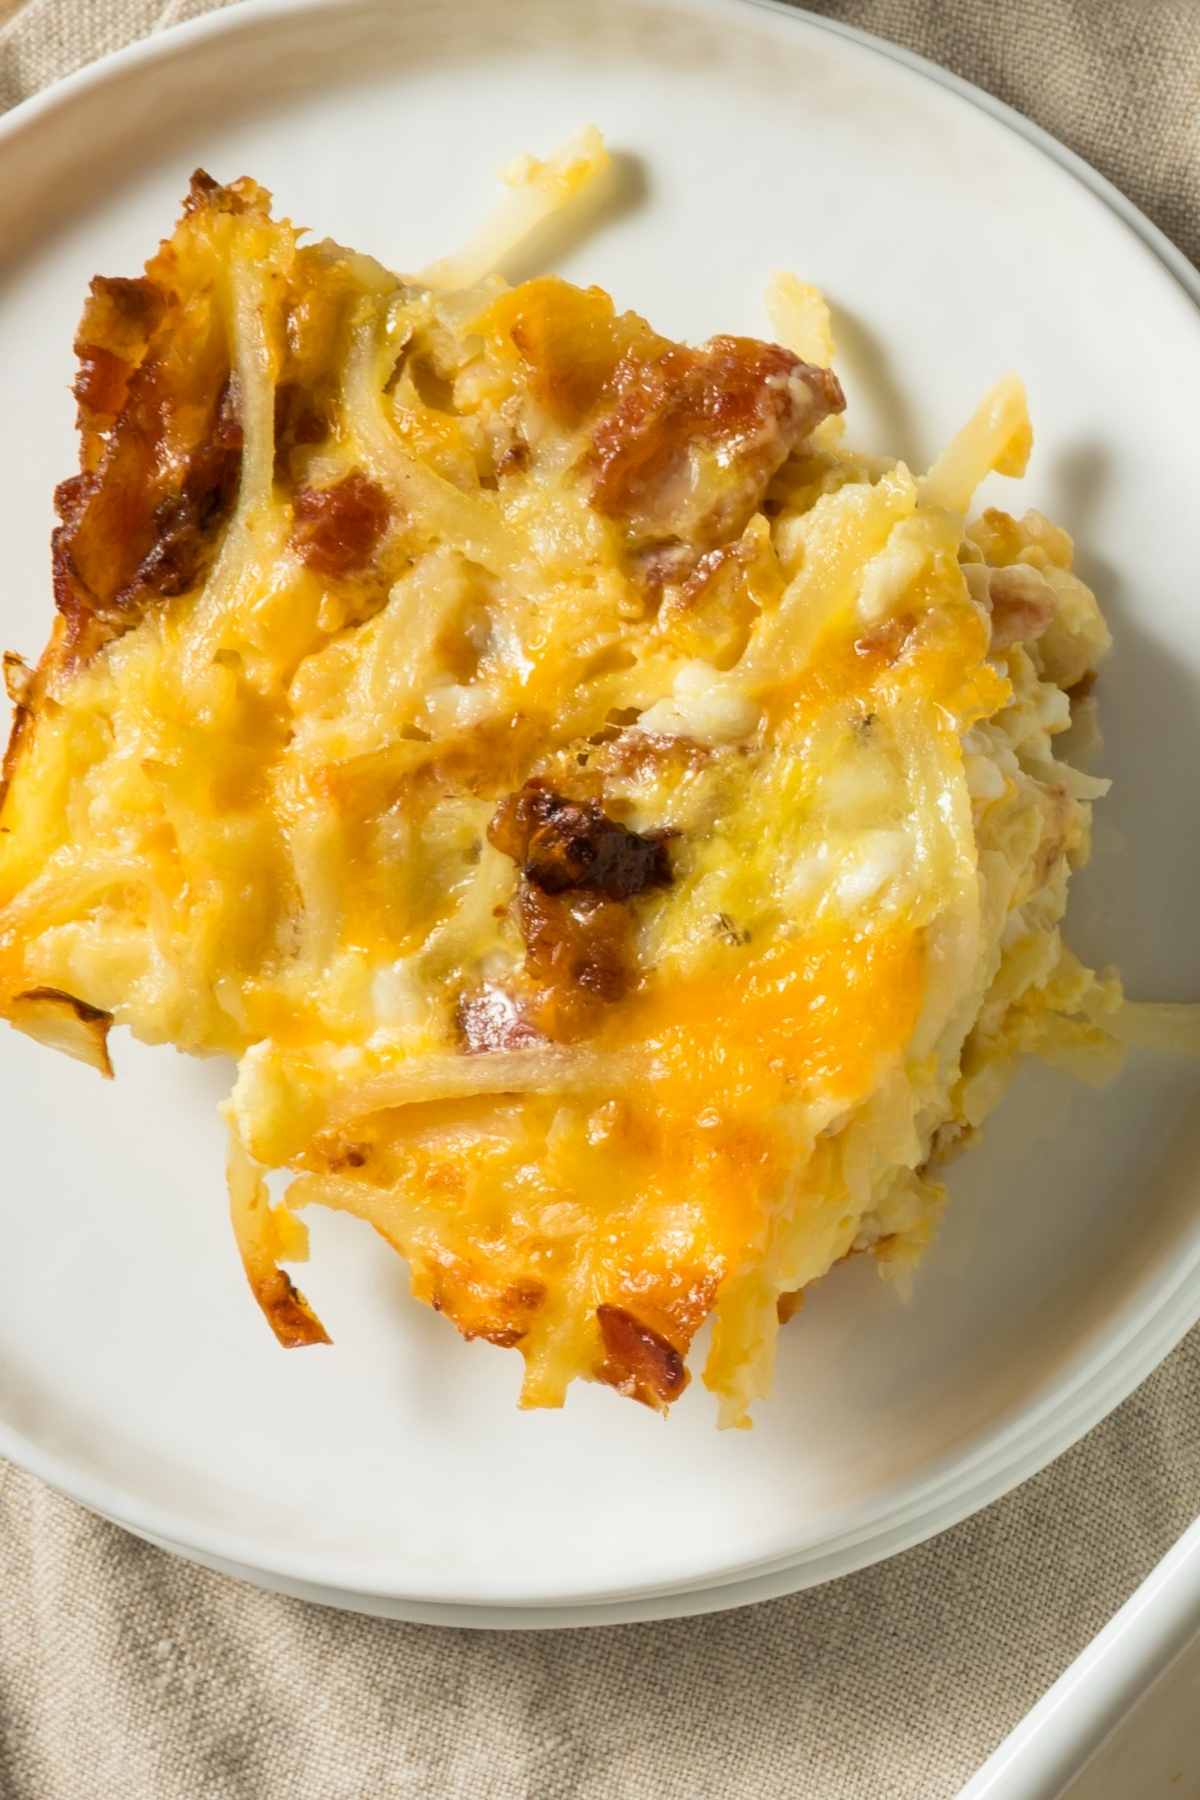 This breakfast potato casserole is ideal for weekend brunch and only takes about 40 minutes to make! Everyone will love it, including your kids.